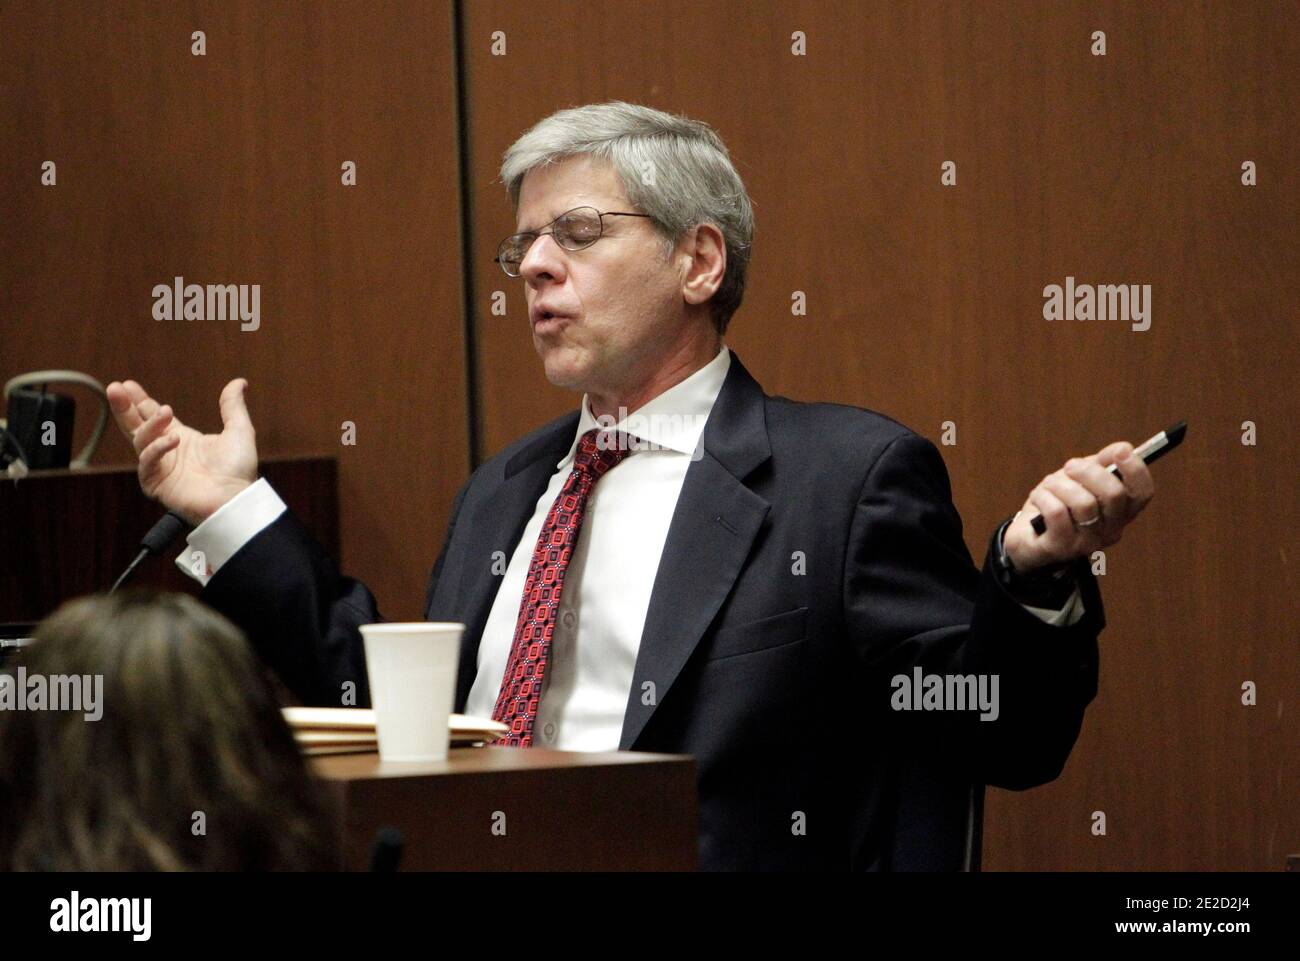 Anesthesiology expert Dr. Steven Shafer pantomimes as he discusses the possibility of a patient, after self-injecting Propofol, waking up and attempting to re-inject, while testifying during Dr. Conrad Murray's involuntary manslaughter trial in Los Angeles on October 20, 2011. Murray has pleaded not guilty and faces four years in prison and the loss of his medical license if convicted of involuntary manslaughter in Michael Jackson's death. Photo by Reed Saxon/Pool/ABACAPRESS.COM Stock Photo